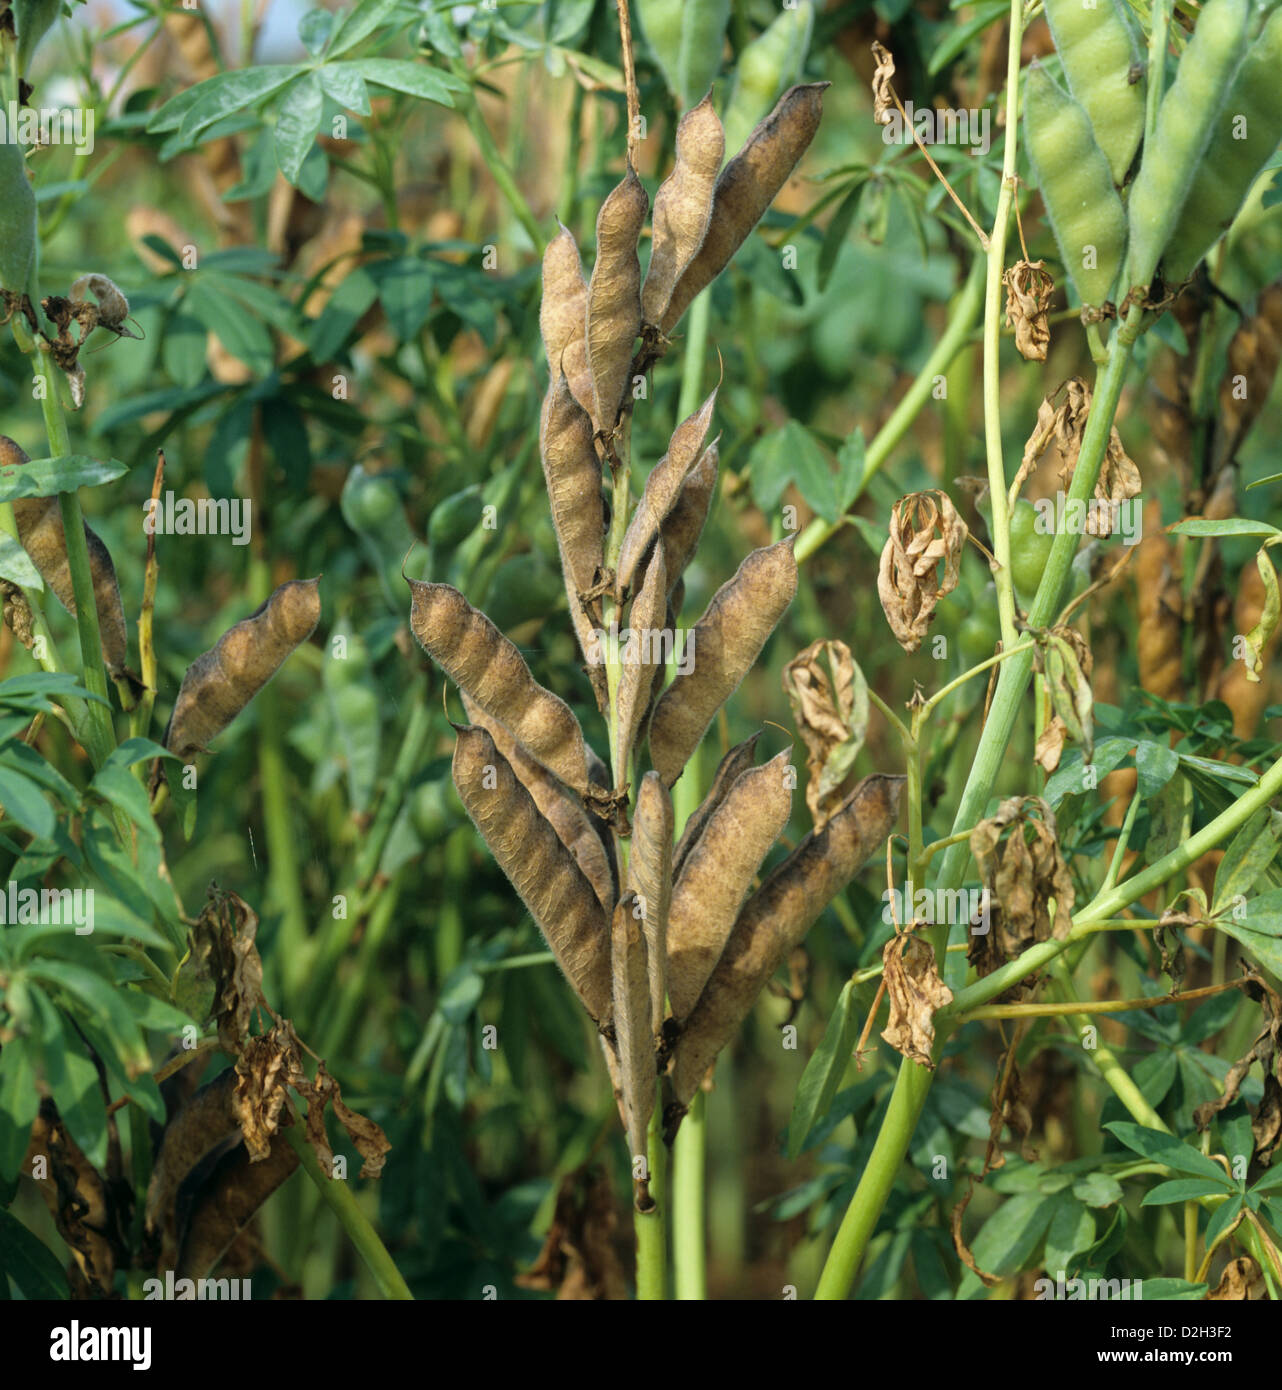 Ripe pods of lupin variety Mutal a low-alkaloid Andean variety used as green manure or livestock feed crop Stock Photo